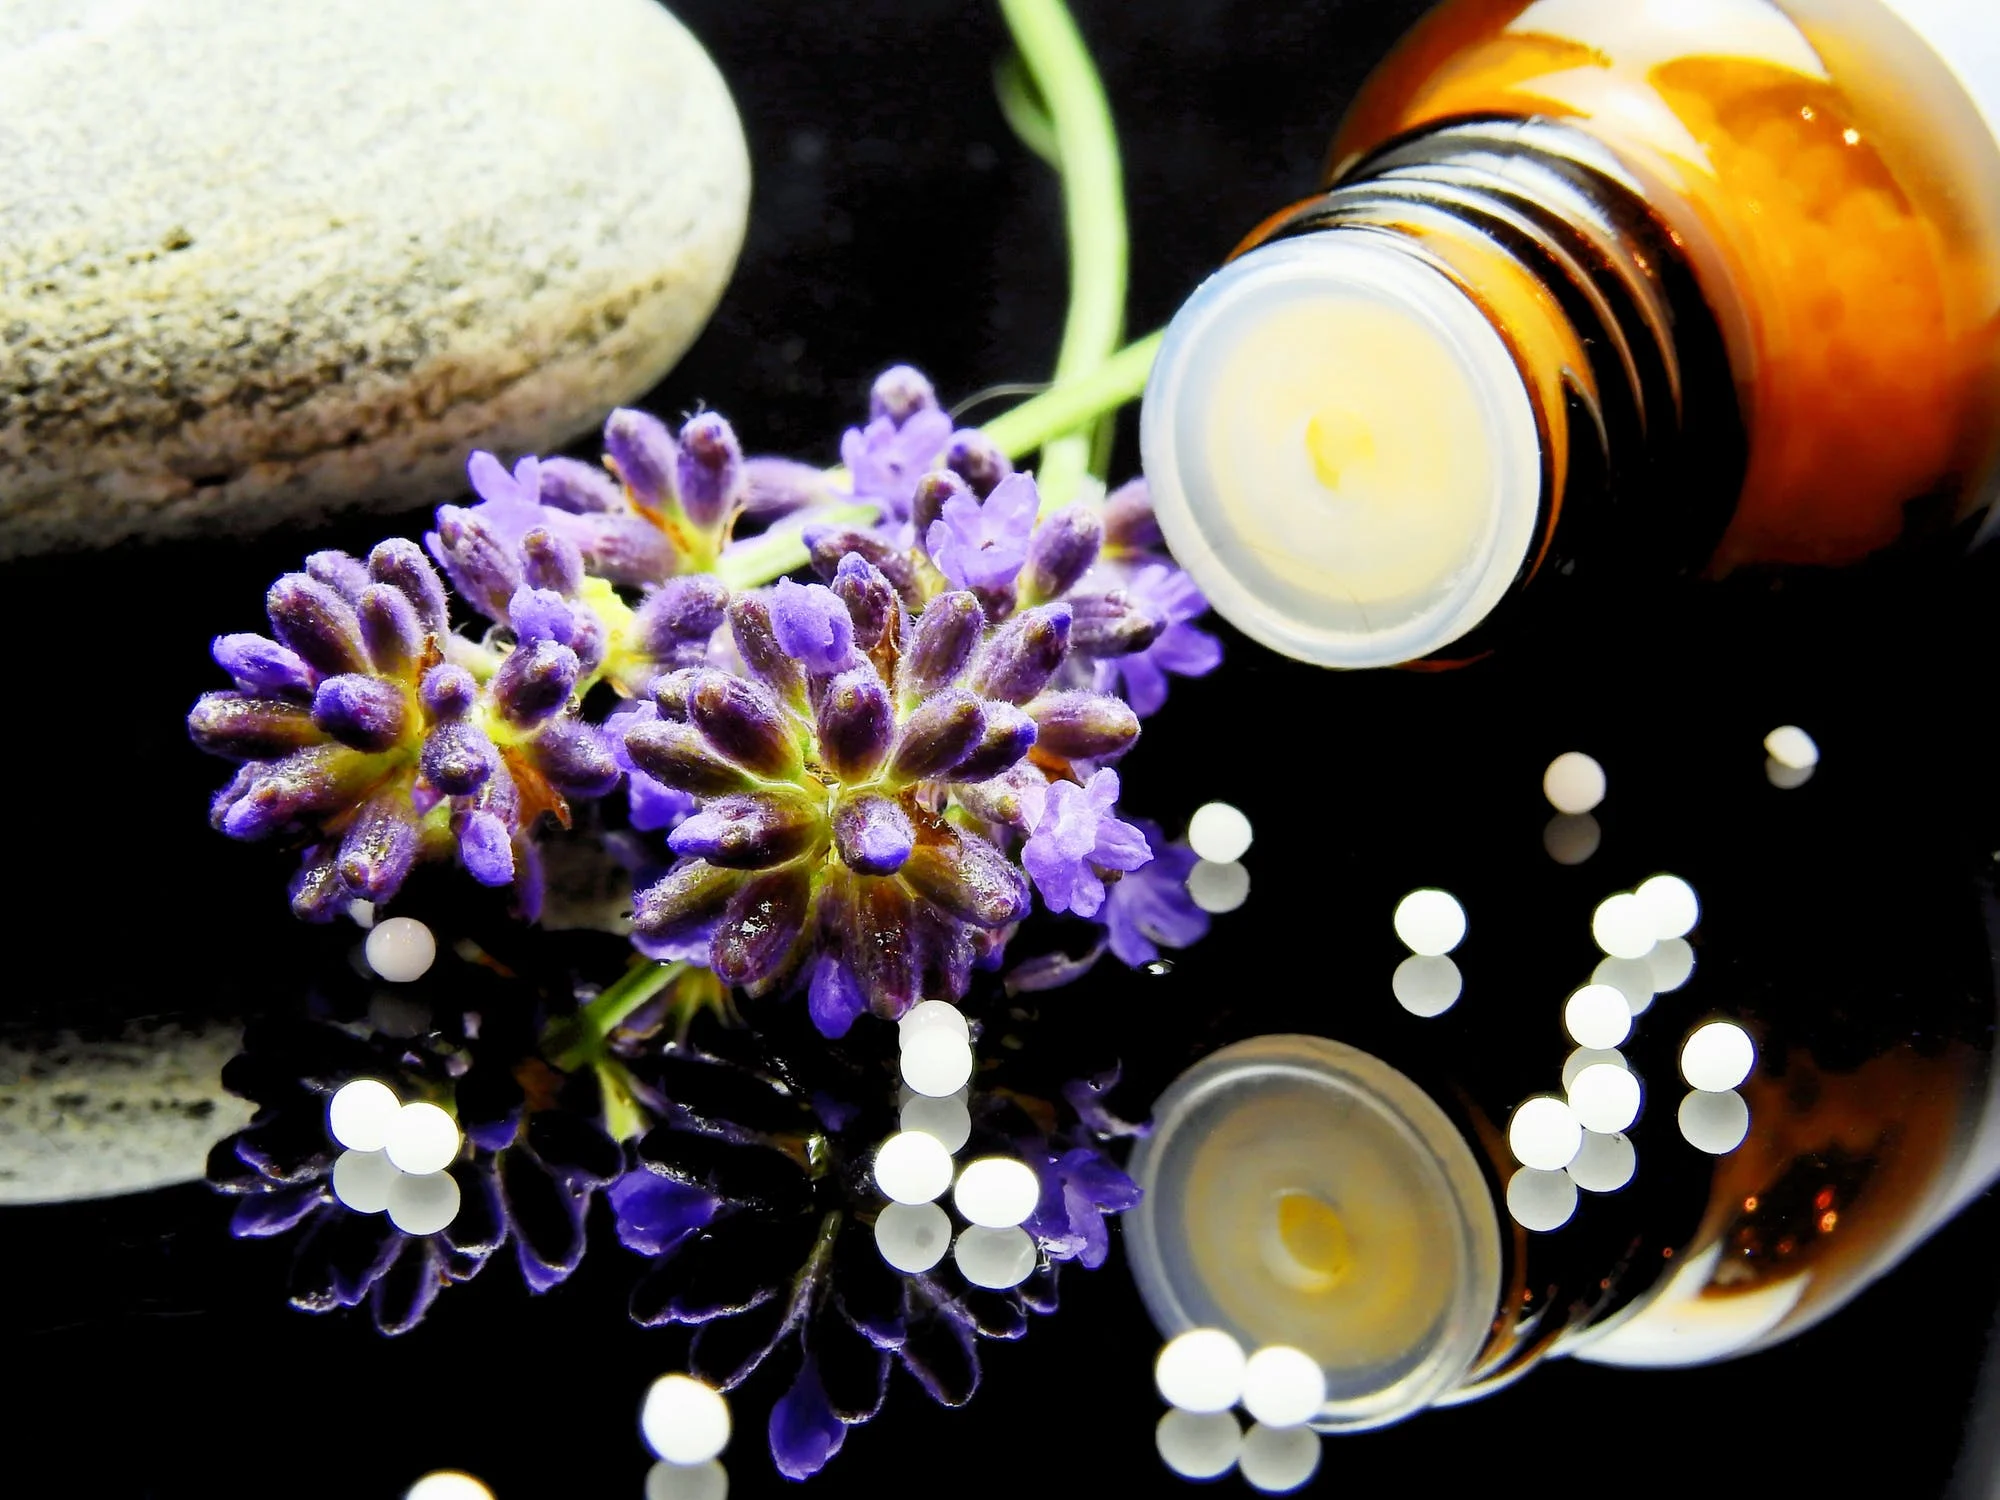 What are the advantages of seeking homoeopathy treatments?